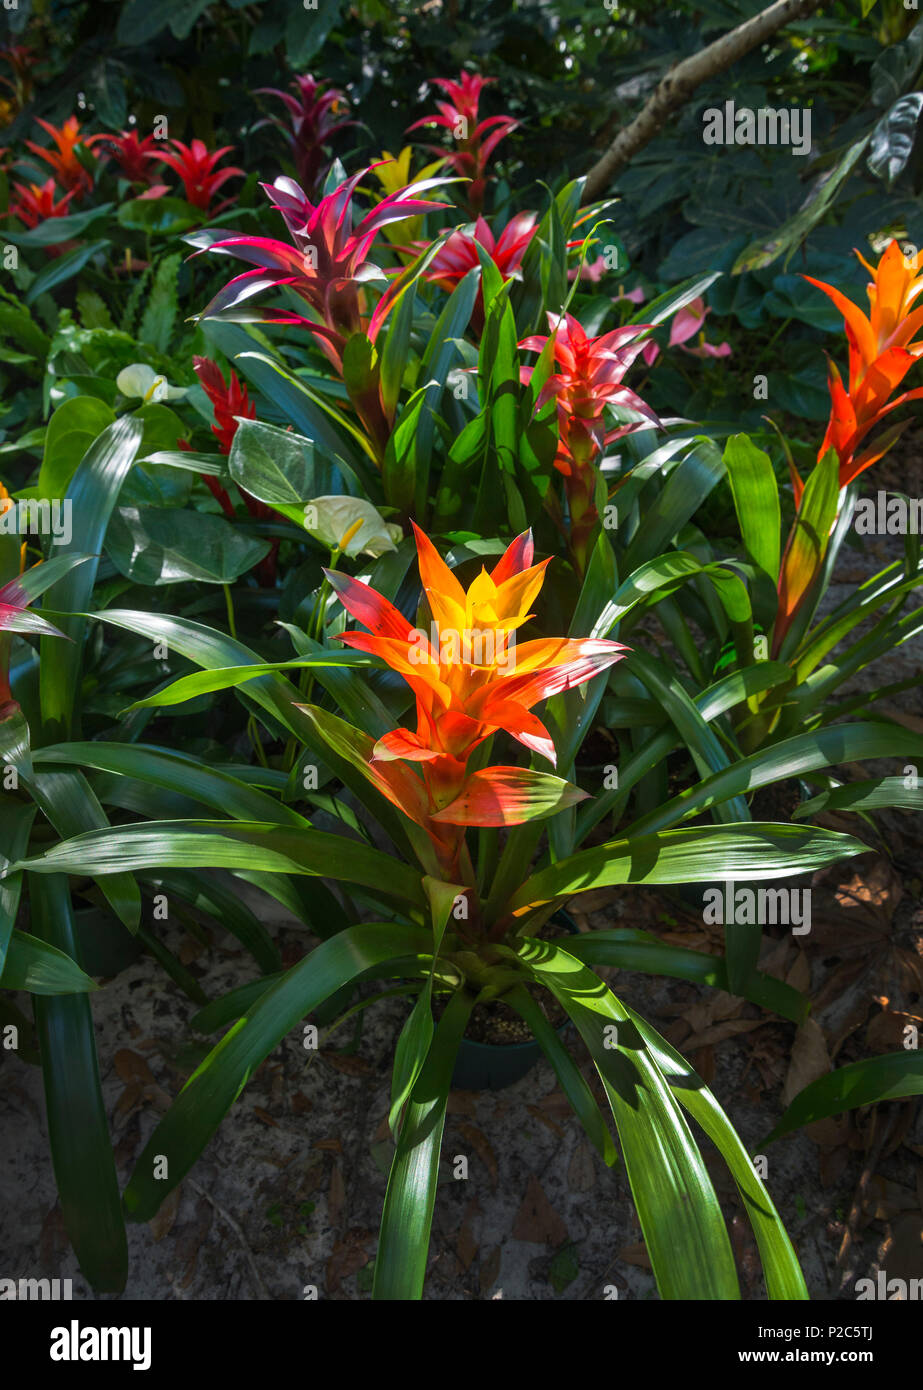 Spring Garden Festival in Gainesville, Florida. Colorful bromeliads for sale Stock Photo